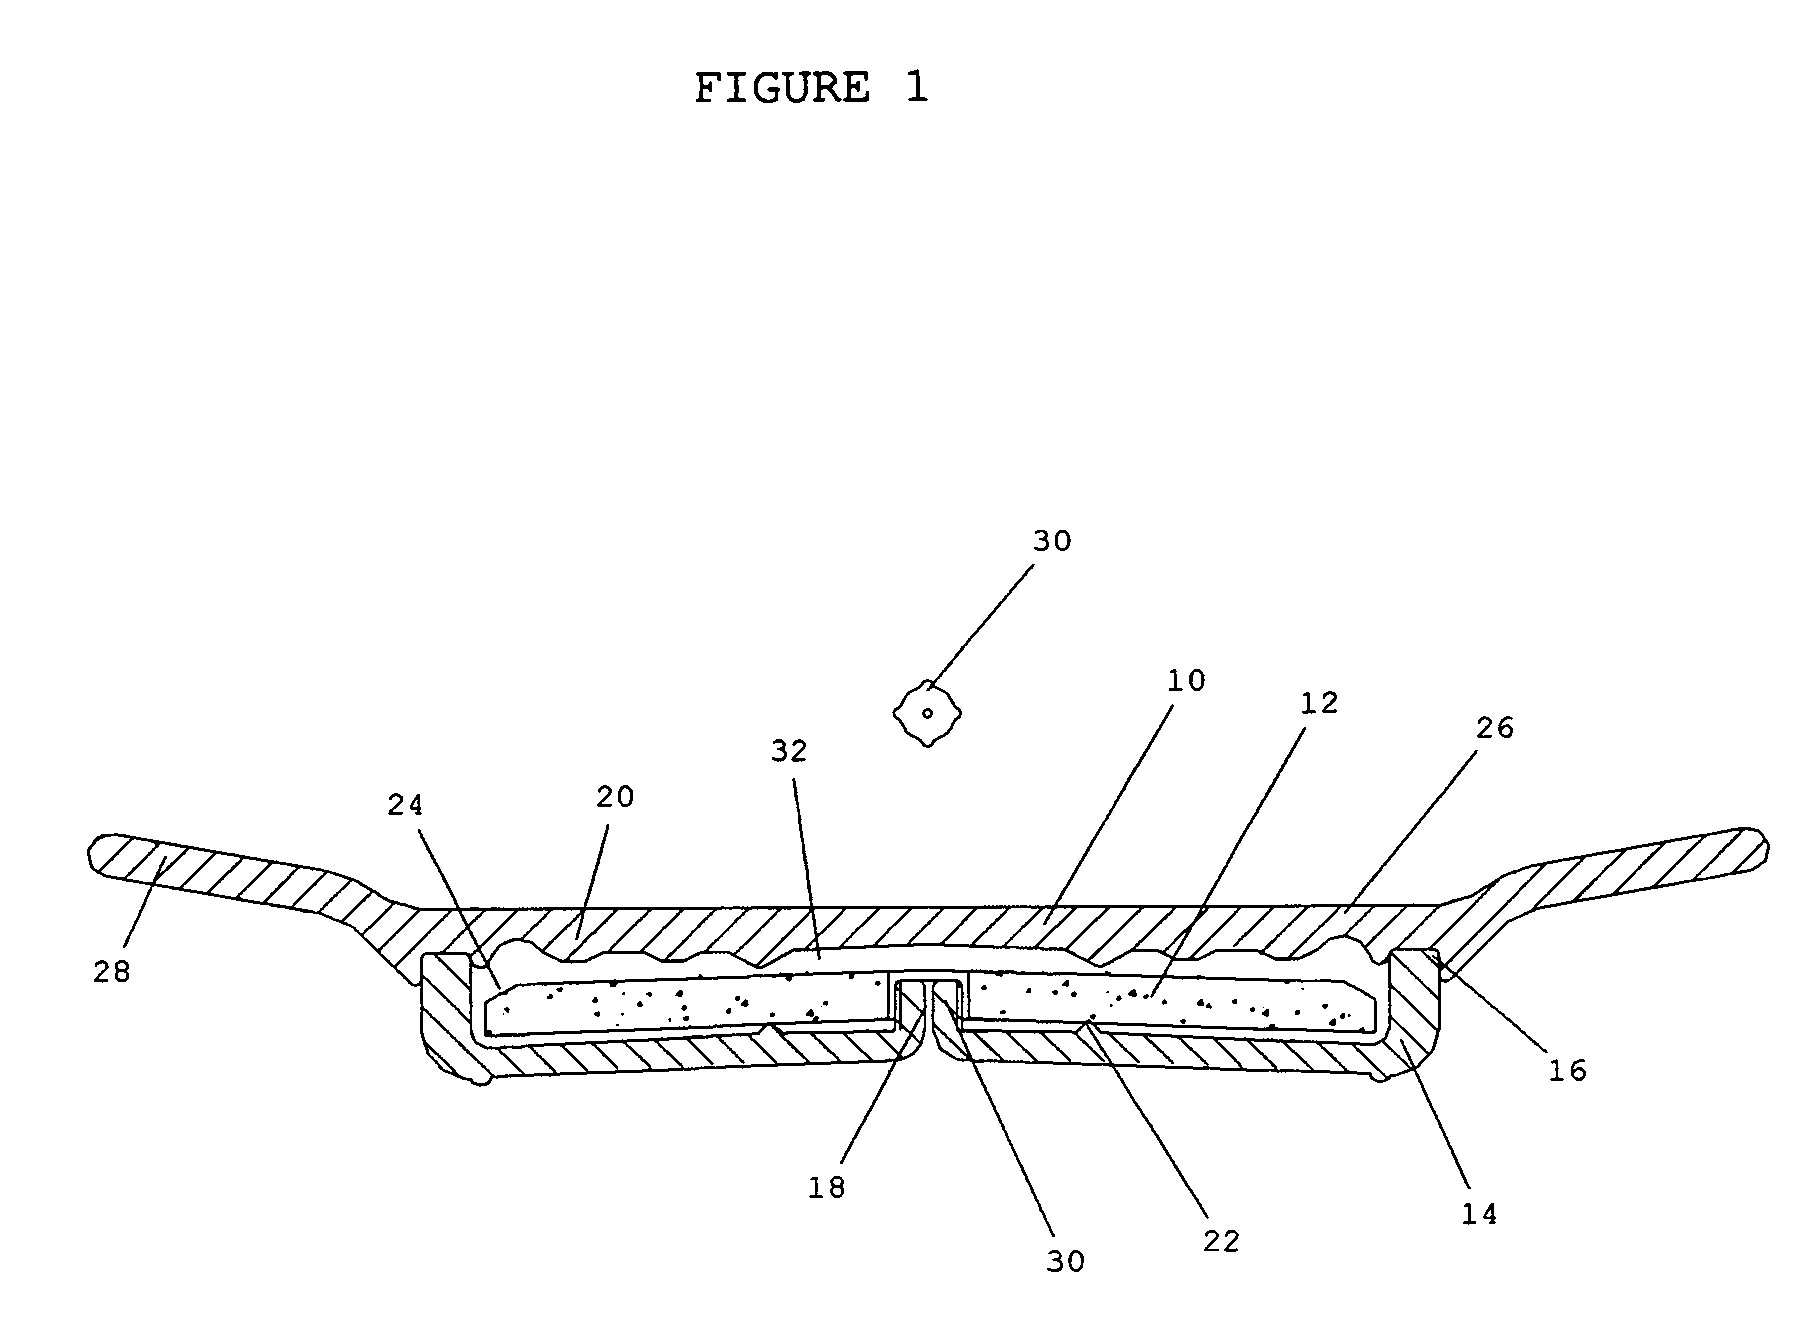 Integrated microwaveable heat storage device